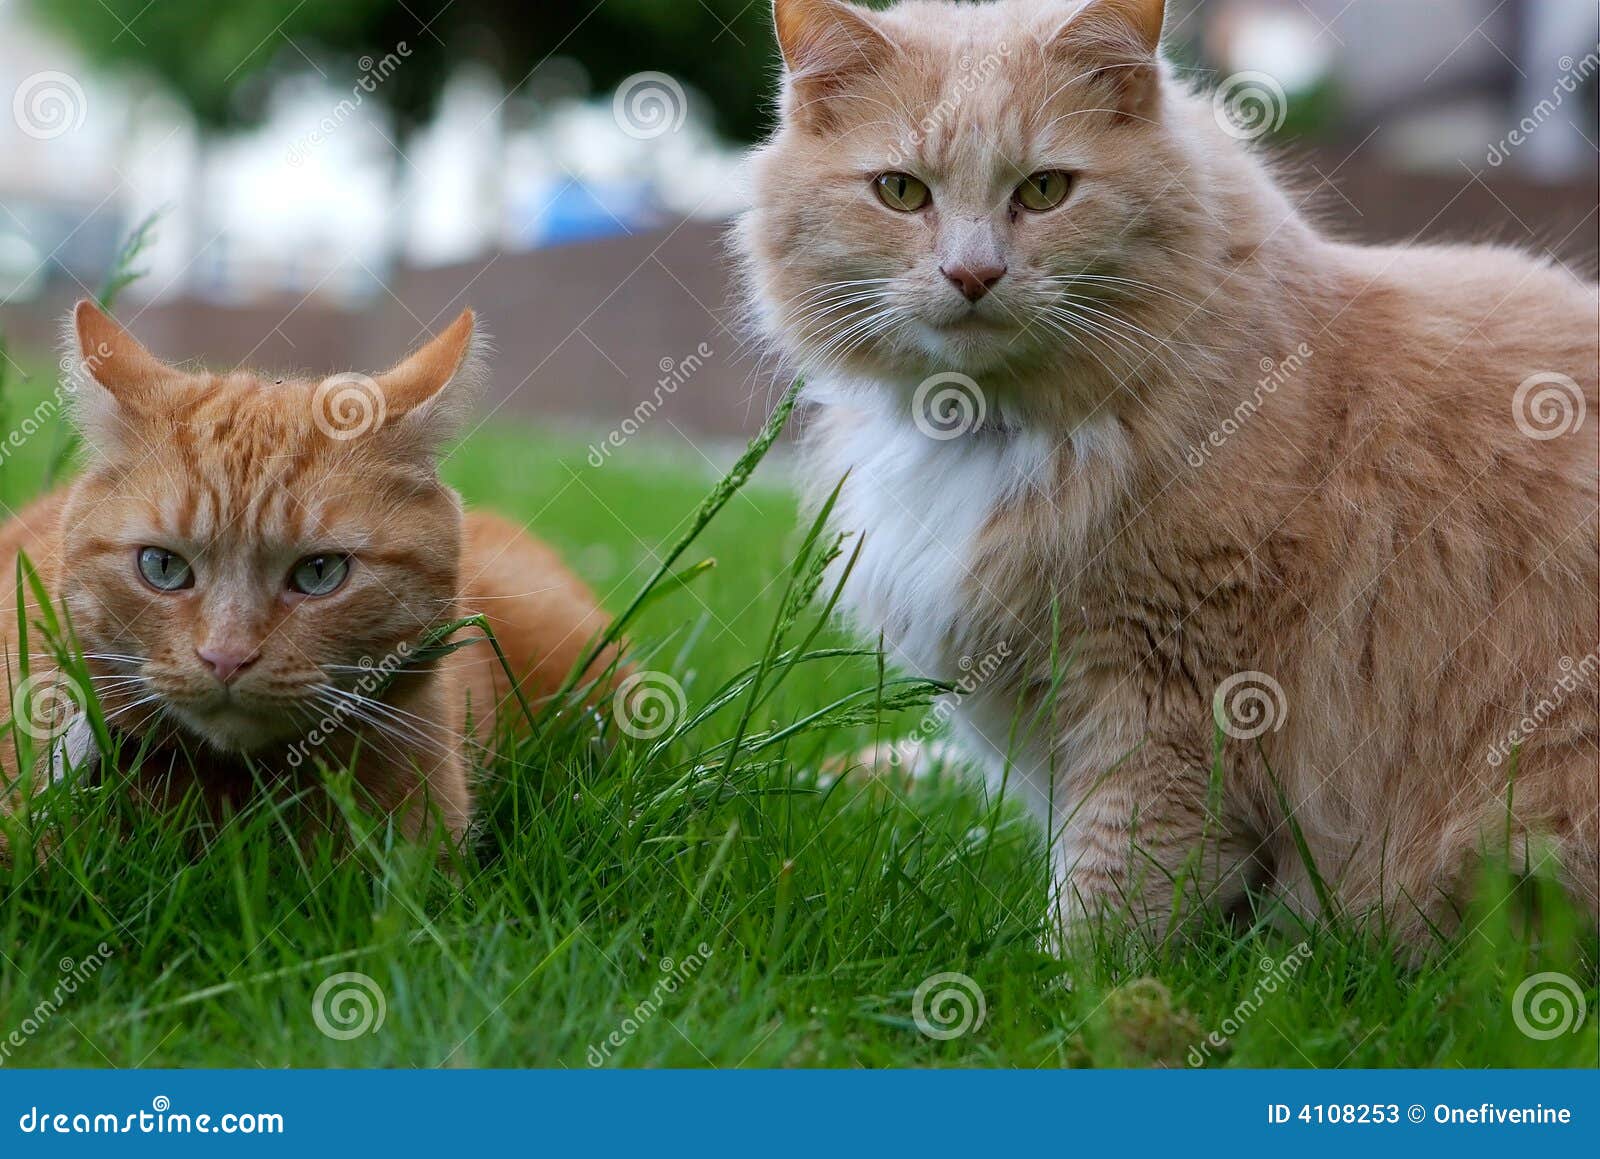 two cats ginger and cream